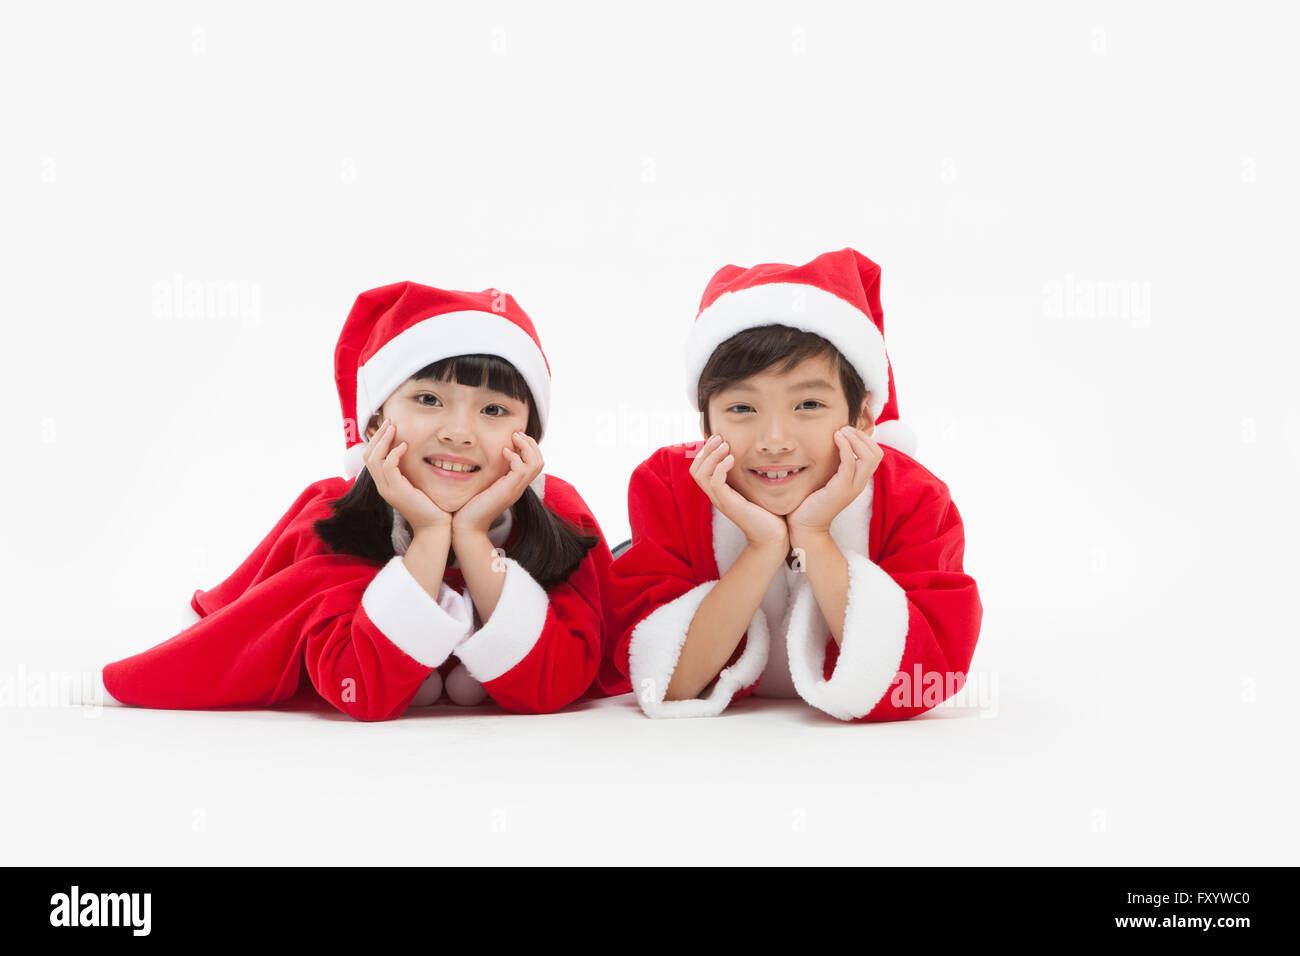 Portrait of smiling boy and girl in santa's clothes placing their chins in their hands staring at front Stock Photo